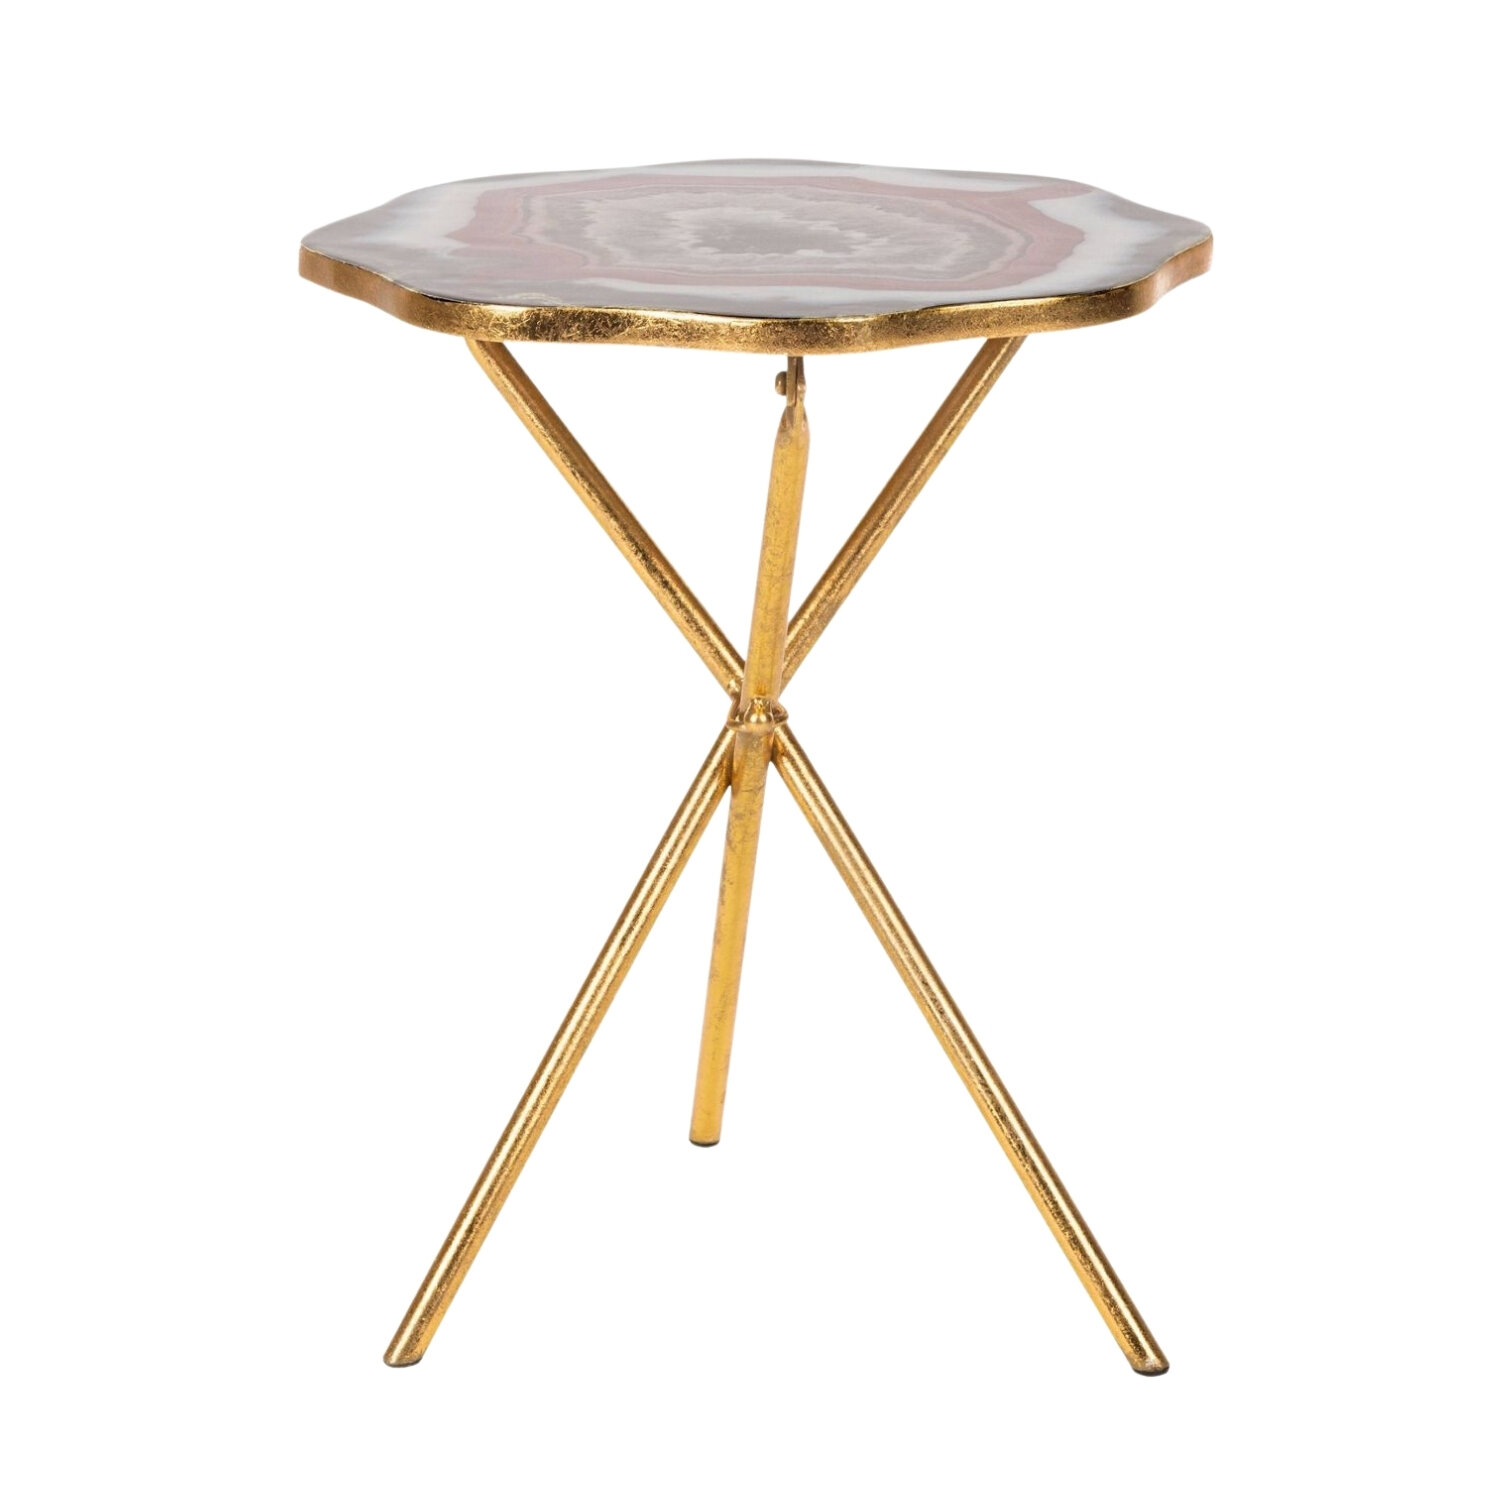 Faux Agate Side Table, Target, $129.99